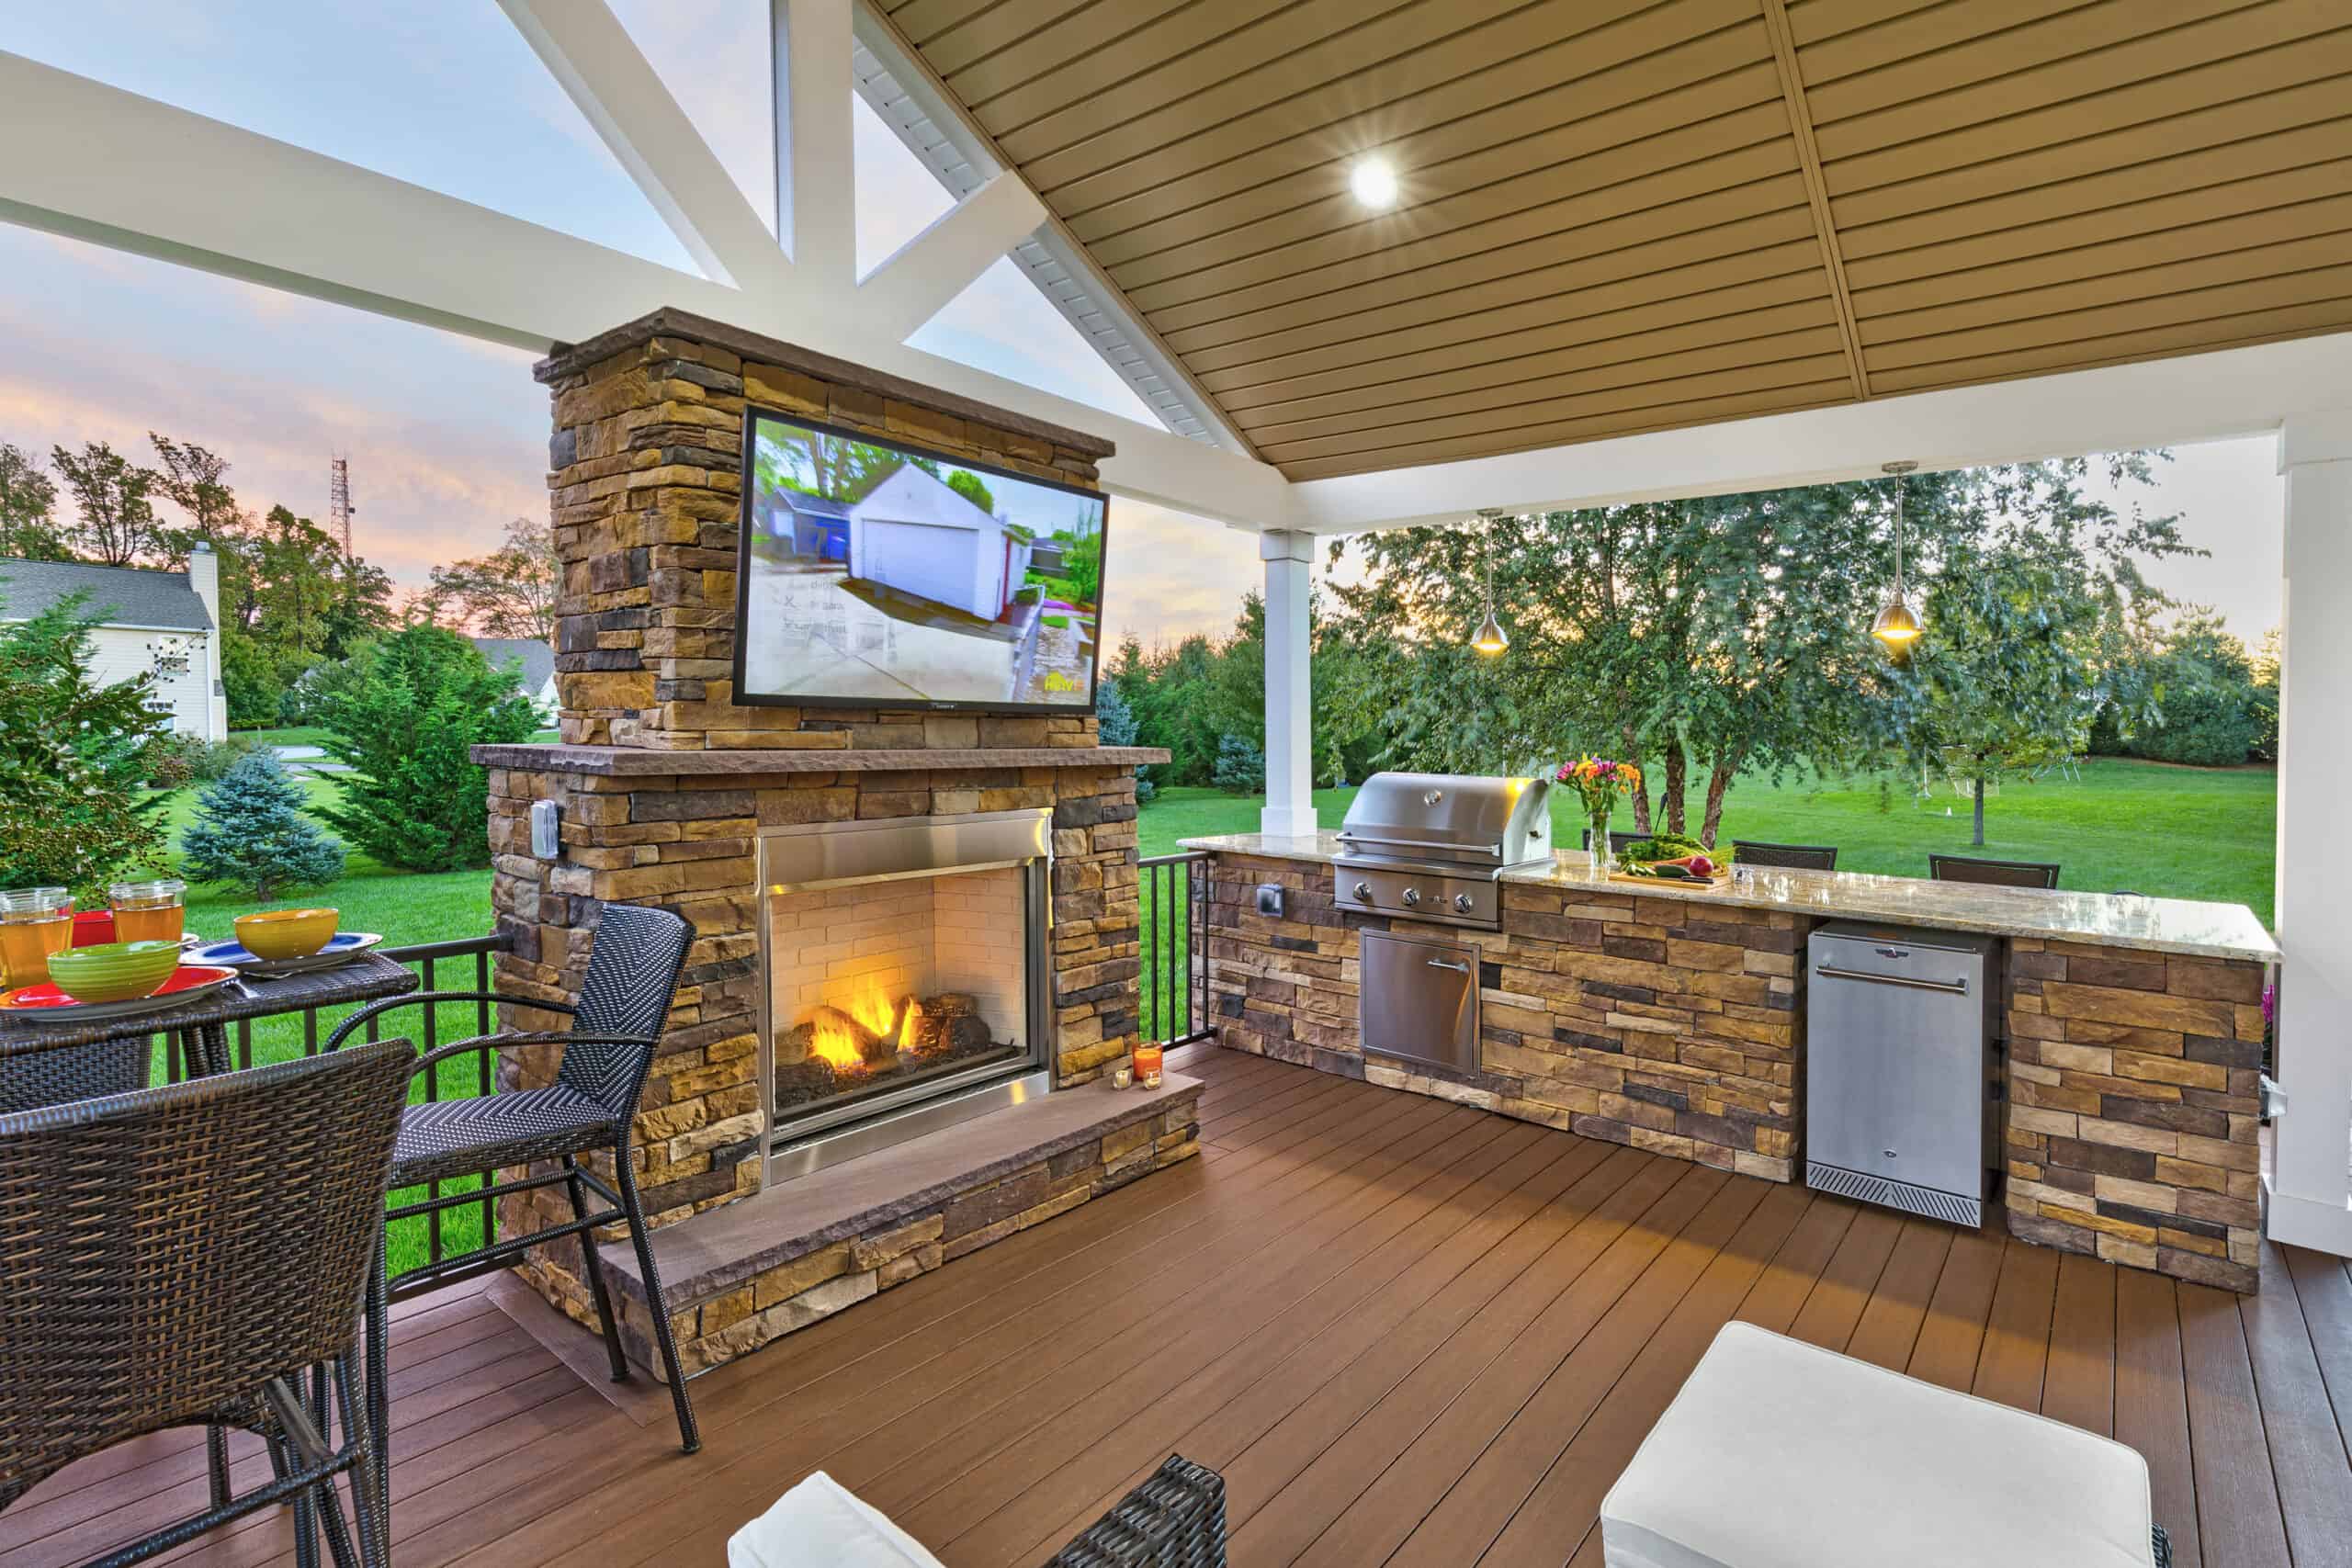 fancy ktichen scaled Mesmerizing outdoor kitchen ideas to Inspire your next big renovation